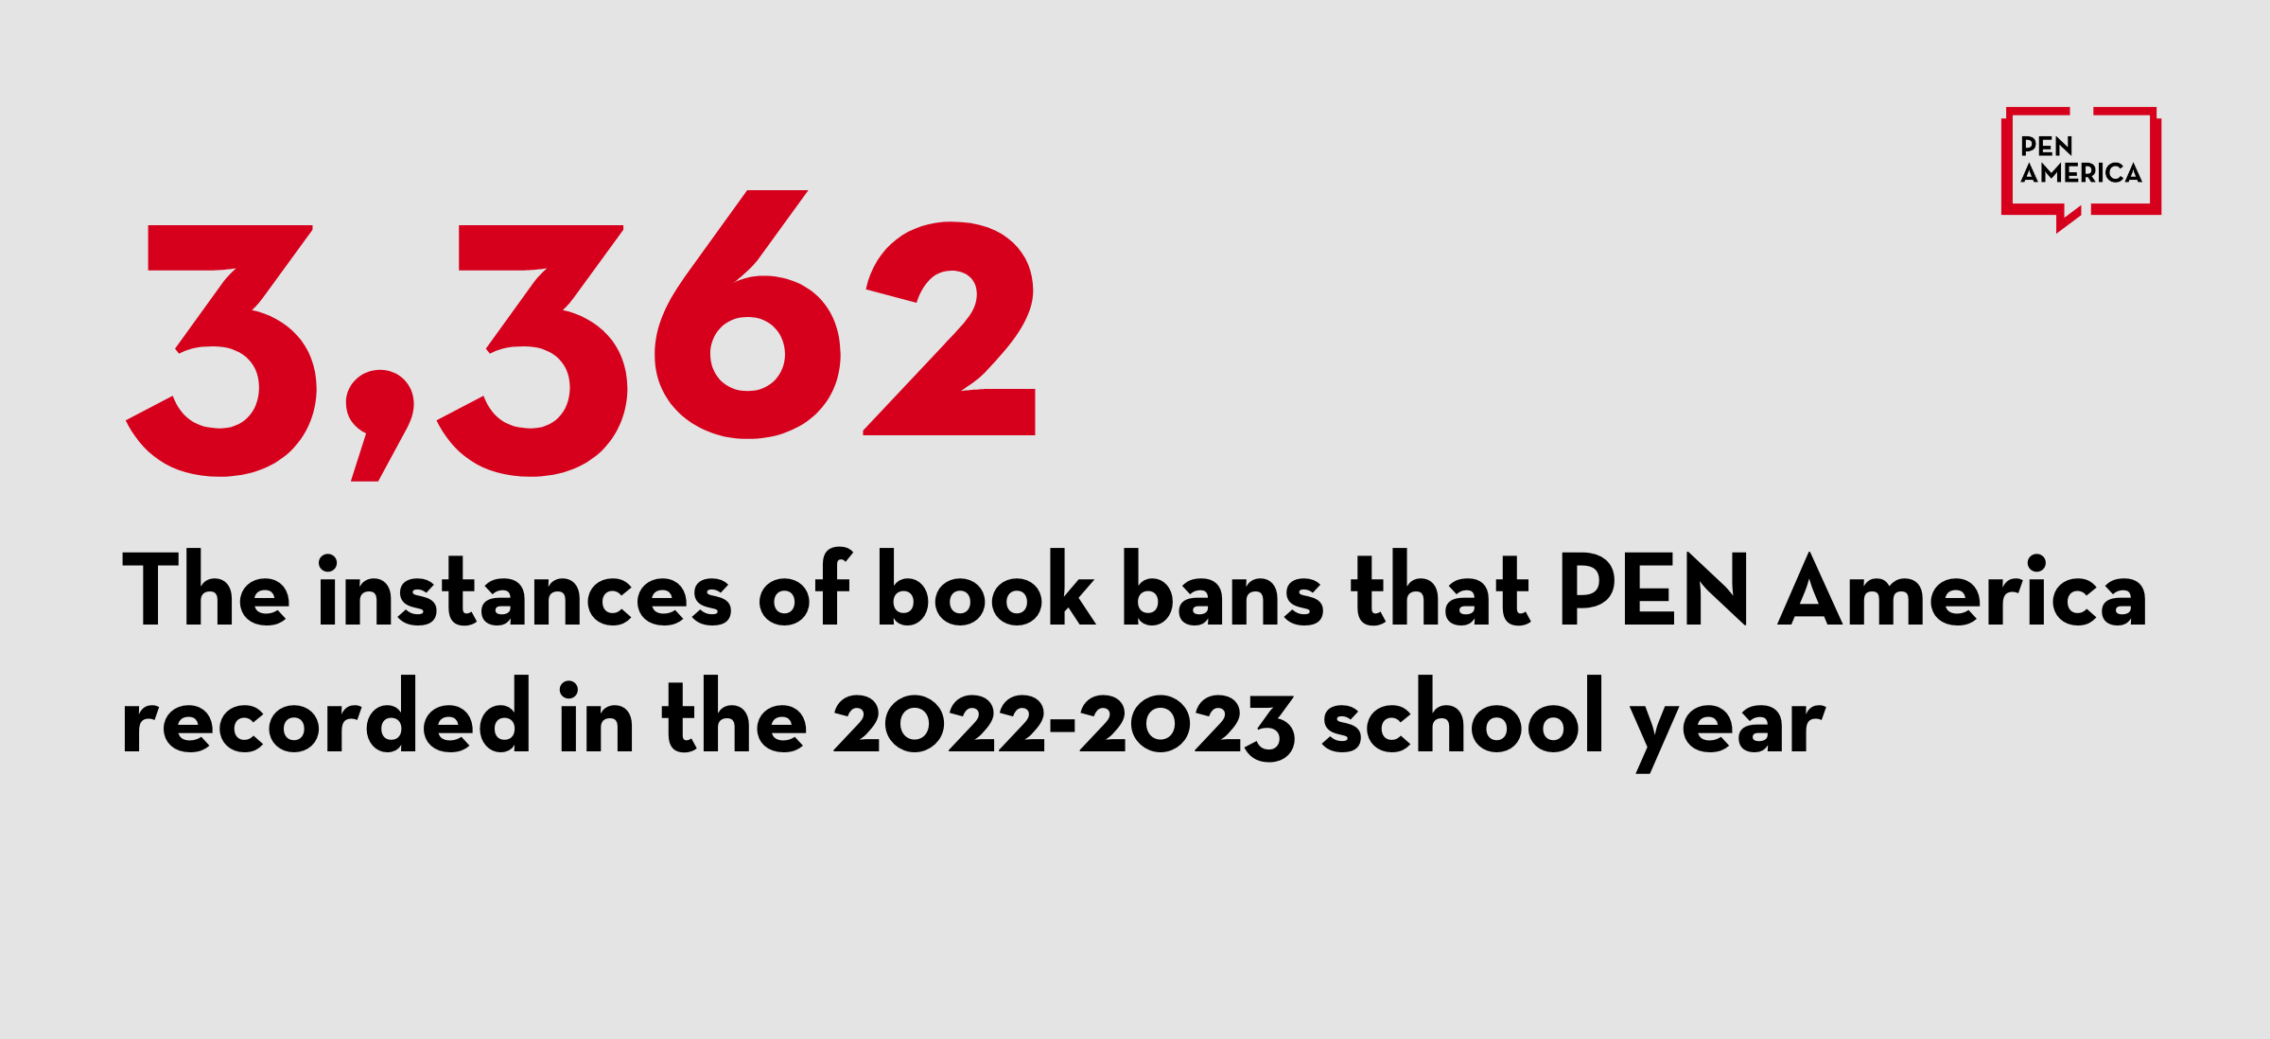 School Book Bans: The Mounting Pressure to Censor - PEN America